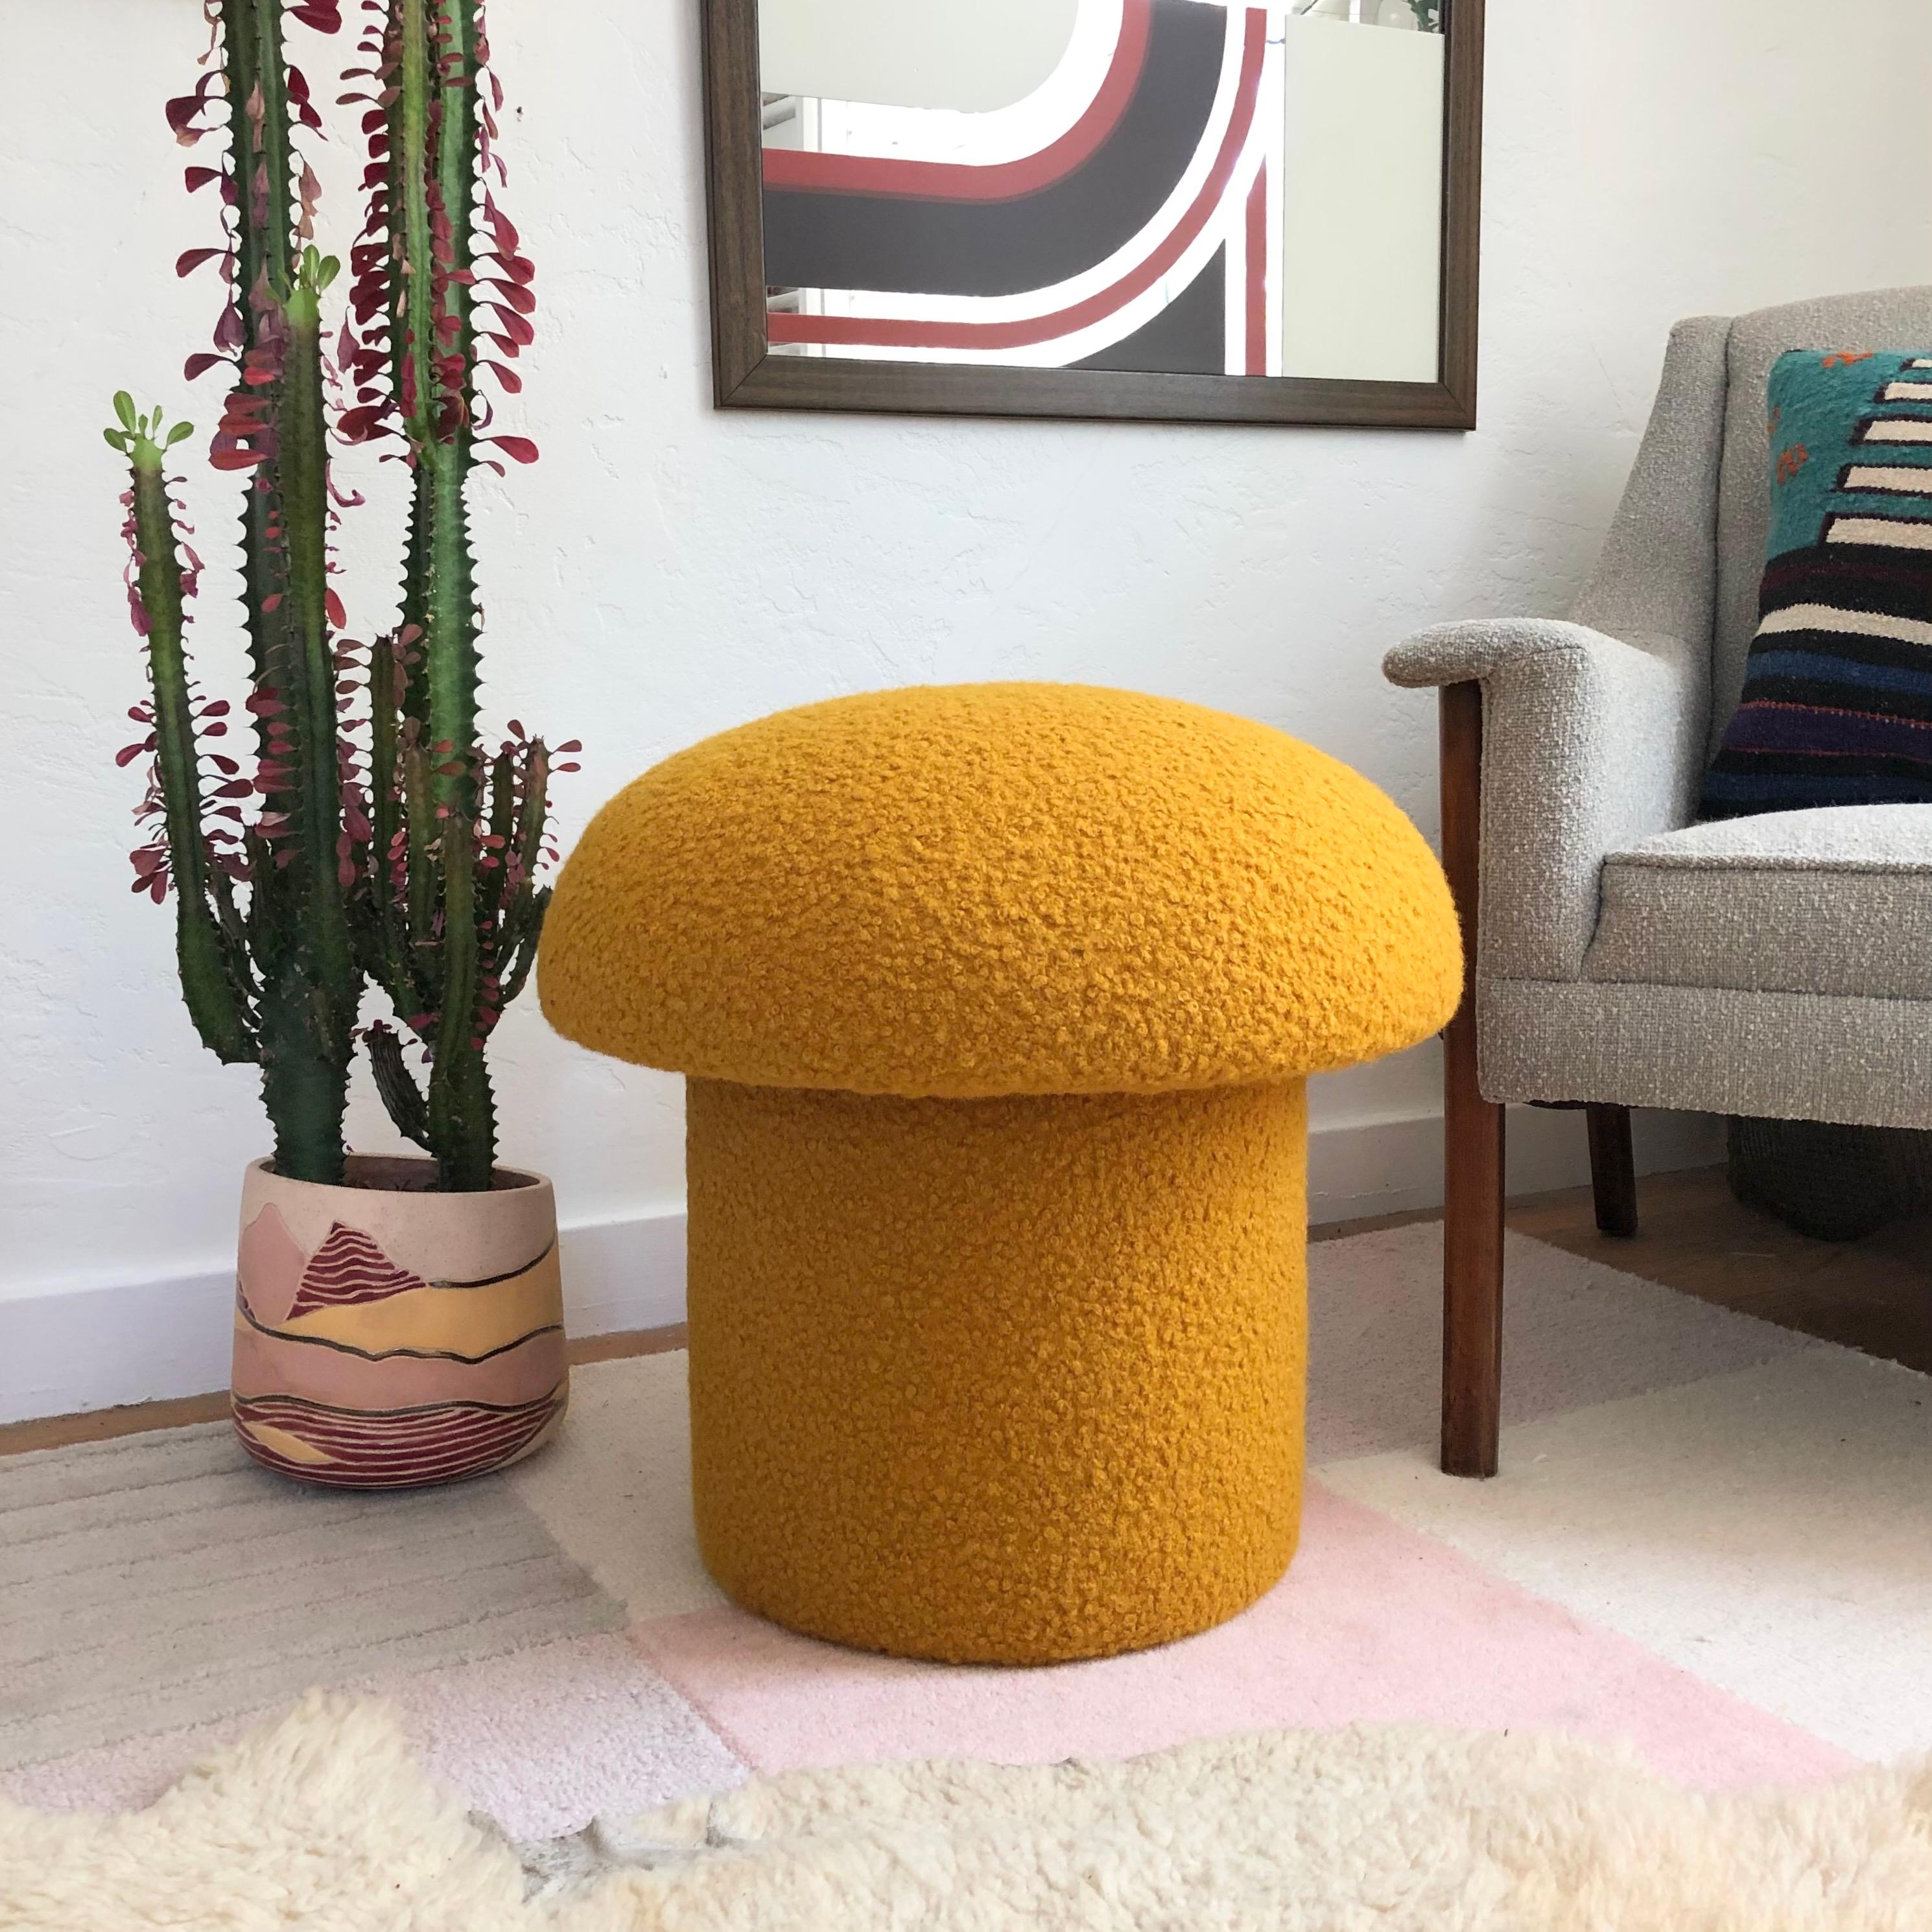 A handmade mushroom shaped ottoman, upholstered in a mustard yellow colored curly boucle fabric. Perfect for using as a footstool or extra occasional seating. A comfortable cushioned seat and sculptural accent piece.
Mushroom ottomans are made to